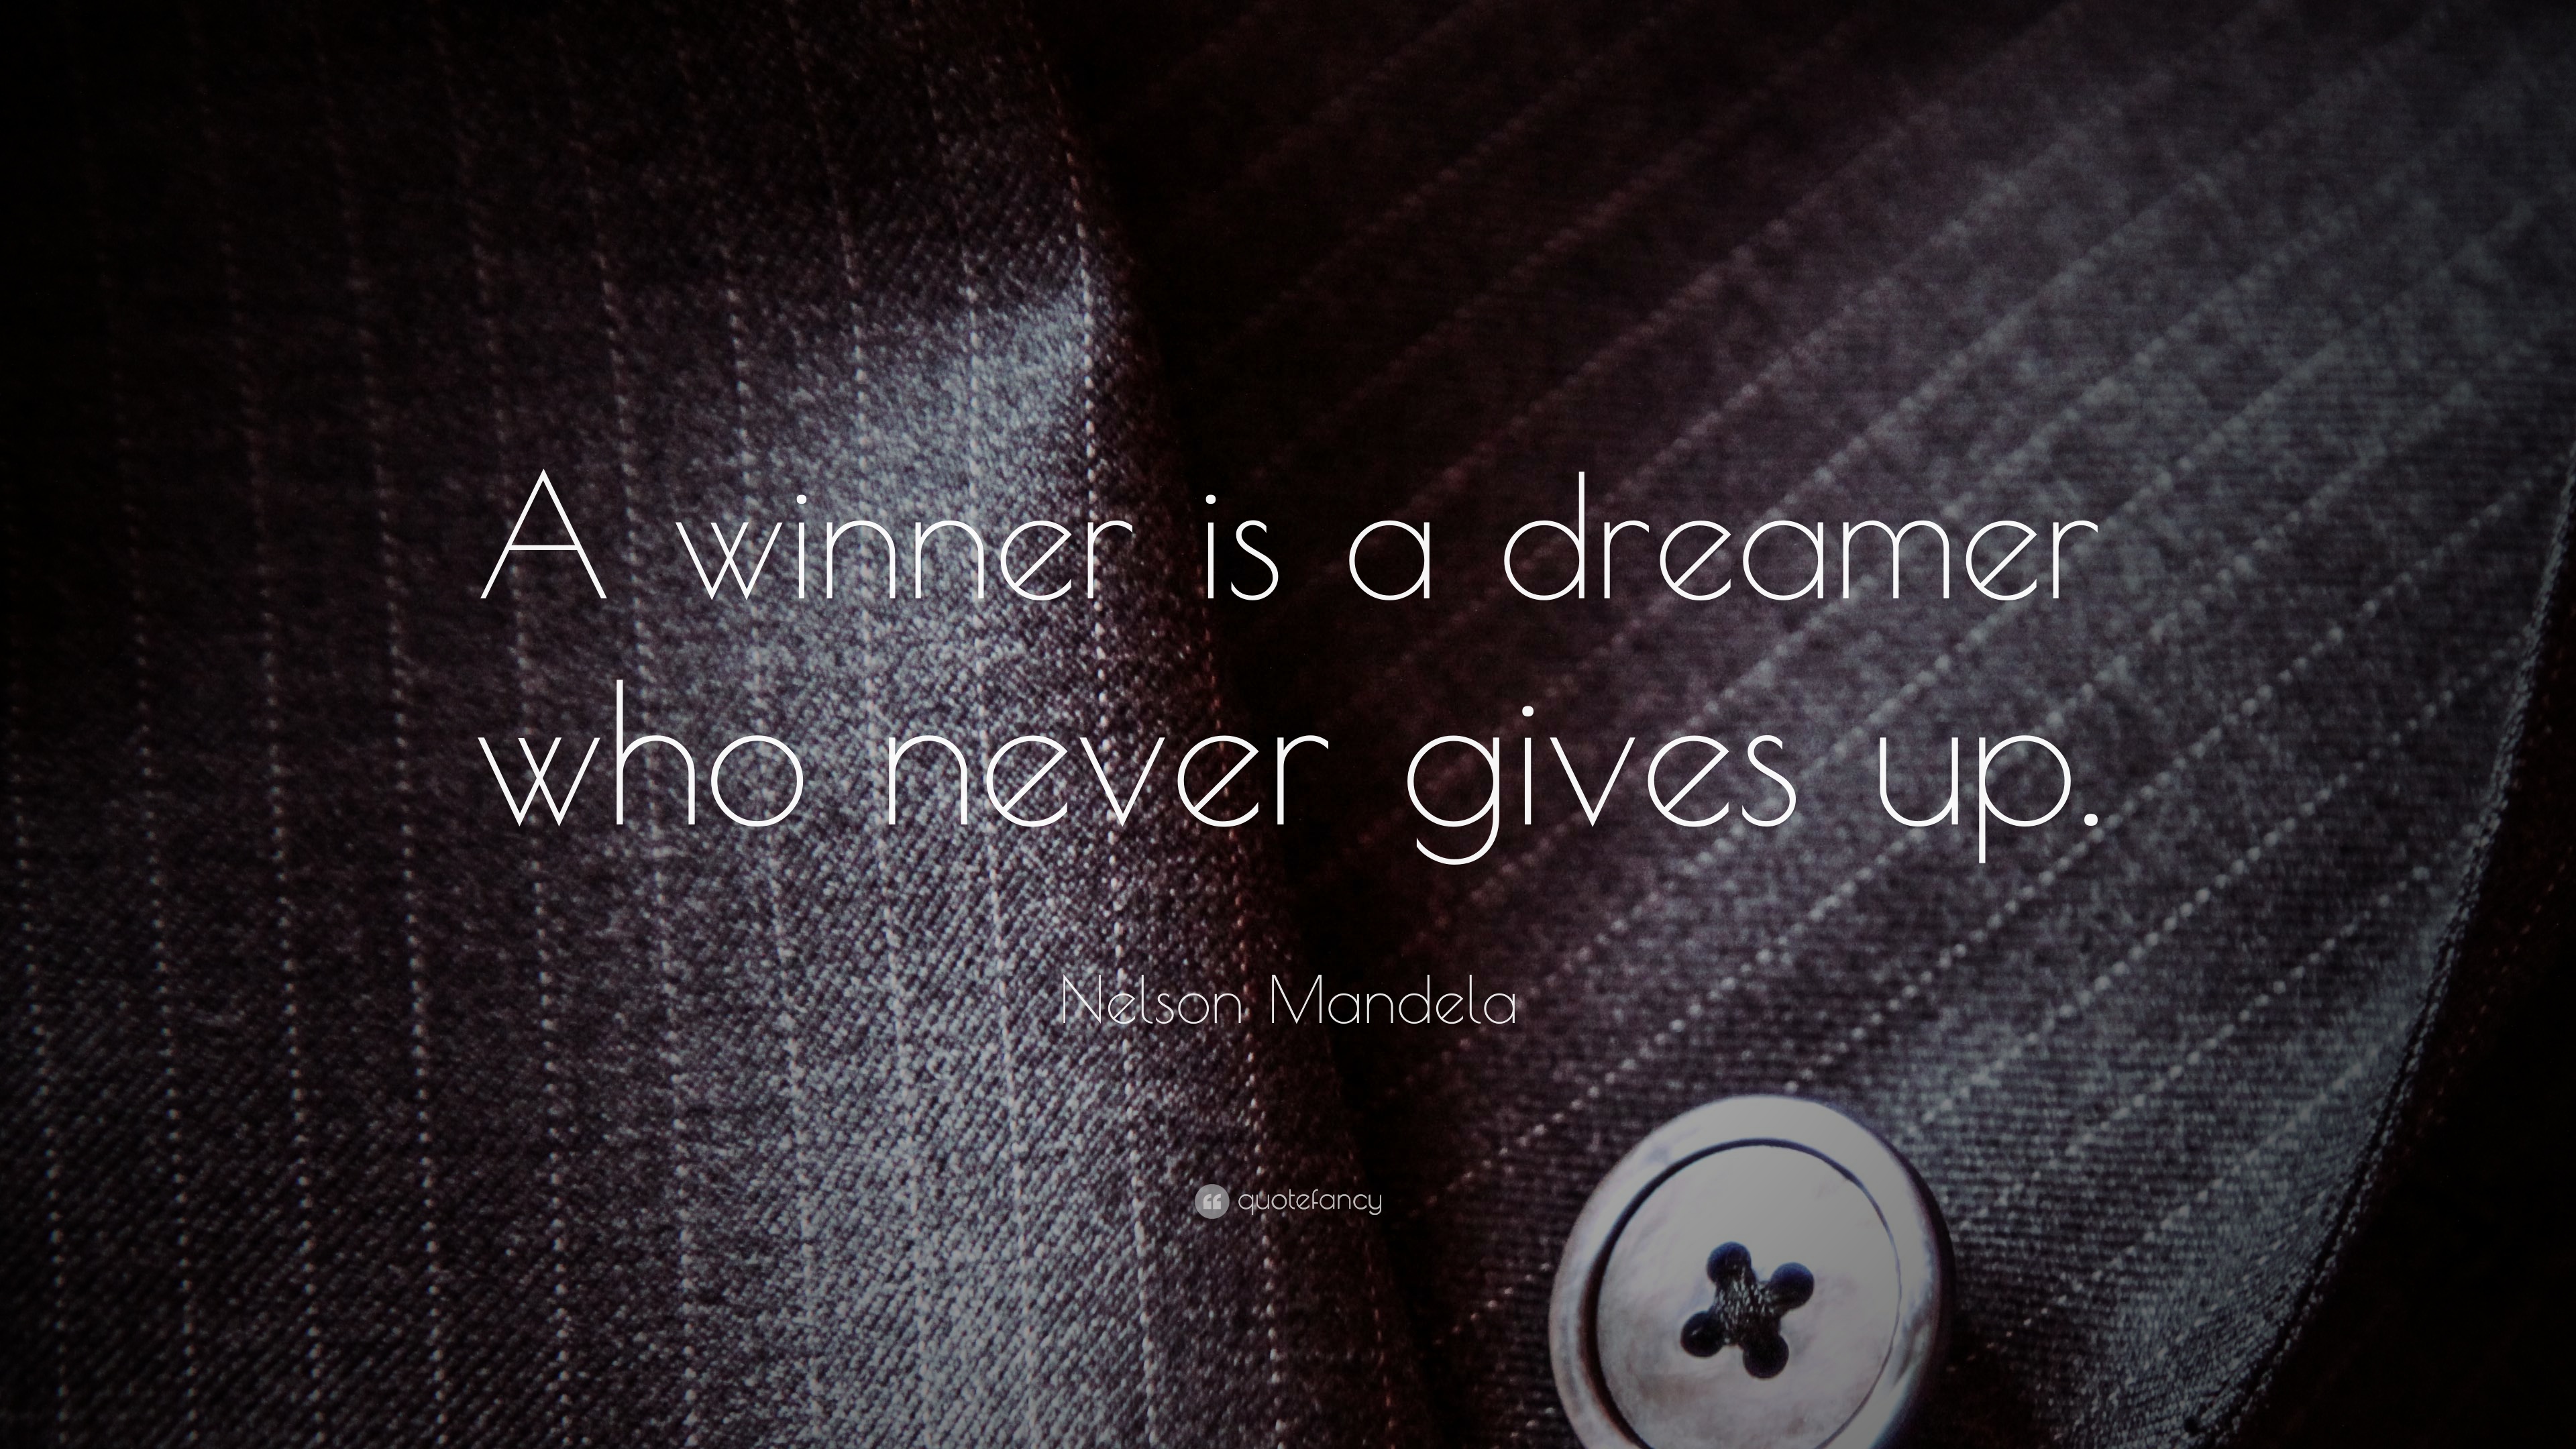 Nelson Mandela Quote: “A winner is a dreamer who never gives up.”